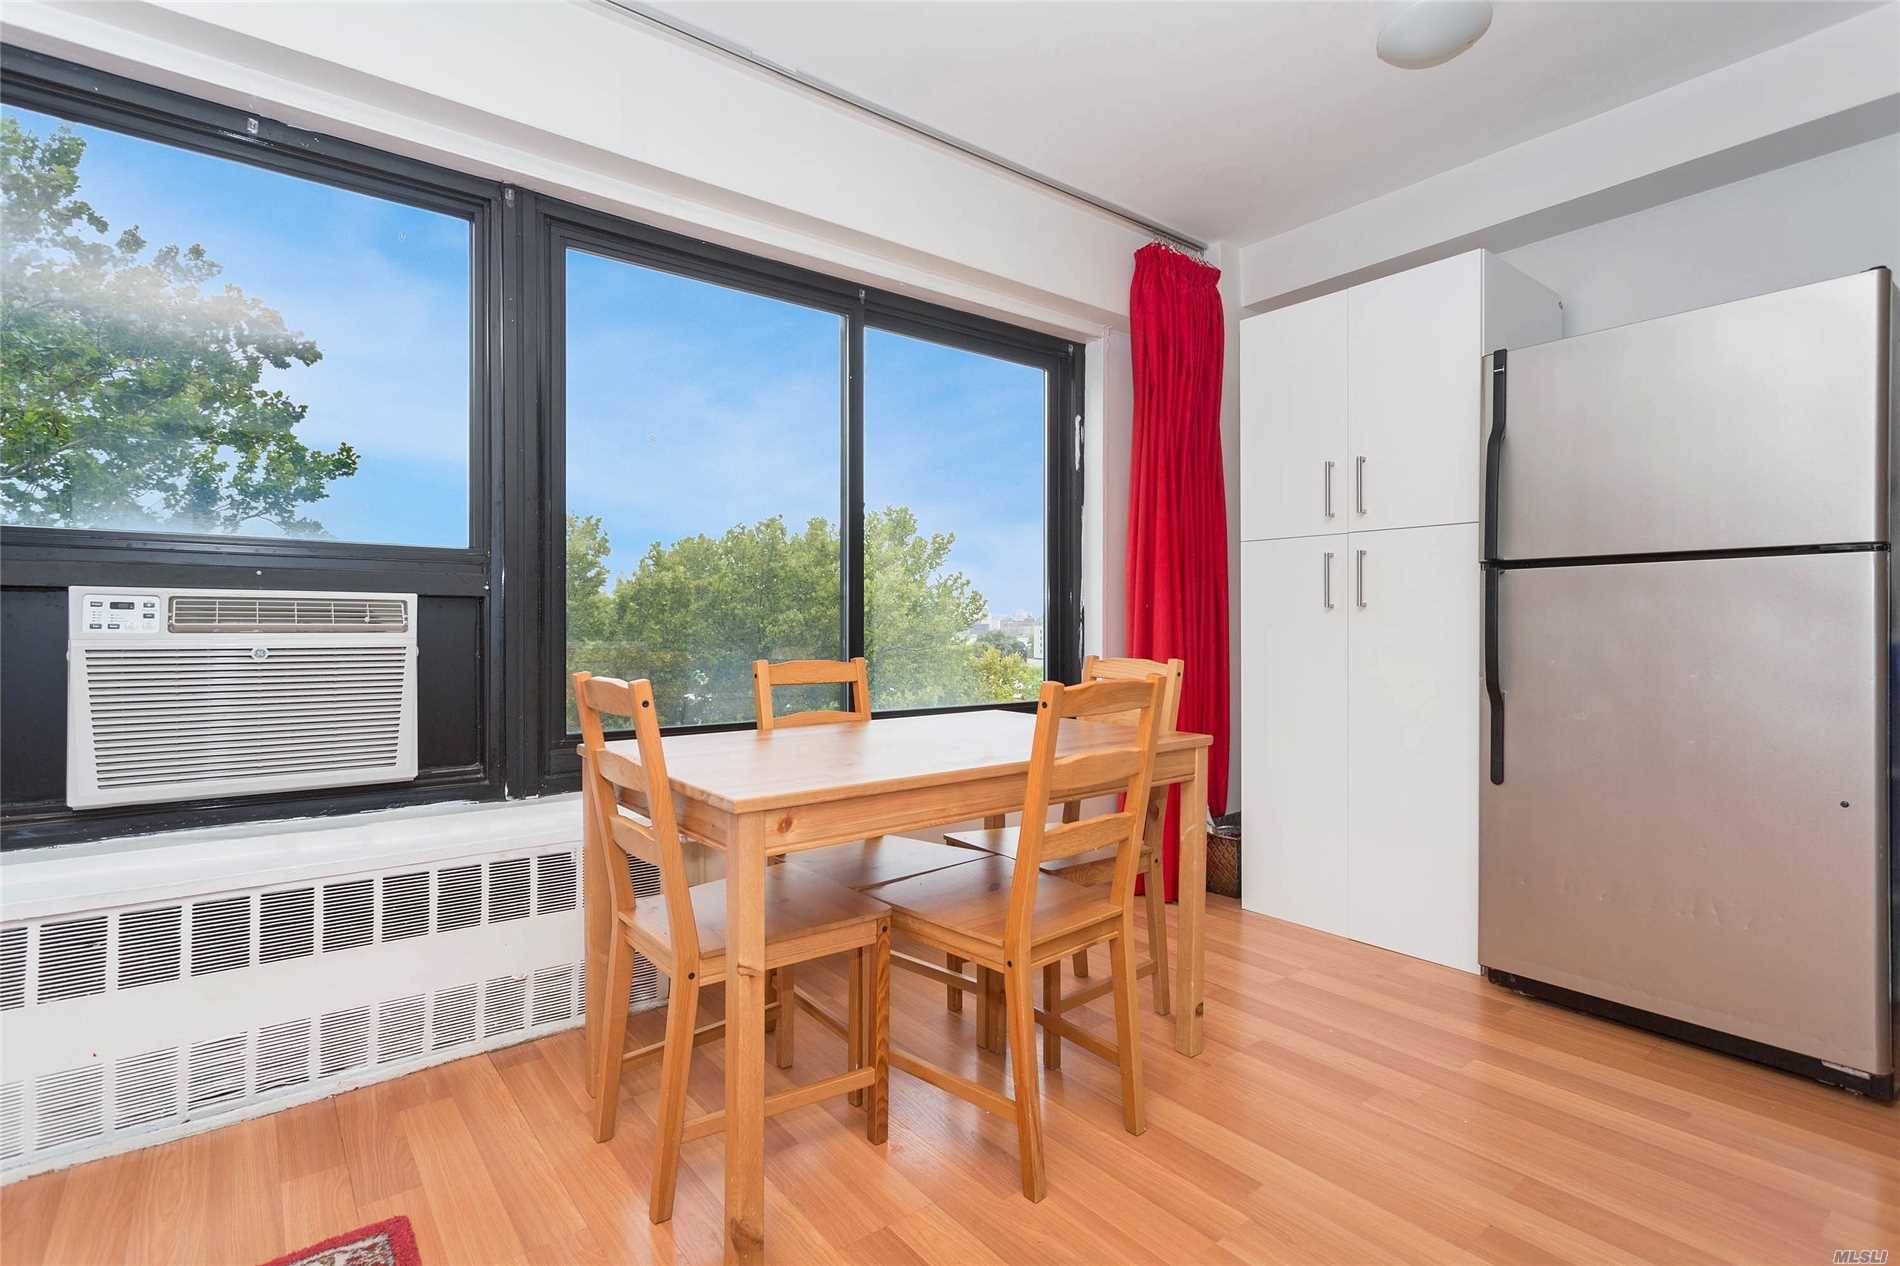 Beautifully Maintained 2 Bedroom/1 Bathroom Unit In North Queensview - A Little Slice Of The Suburbs Right Here In Lic.